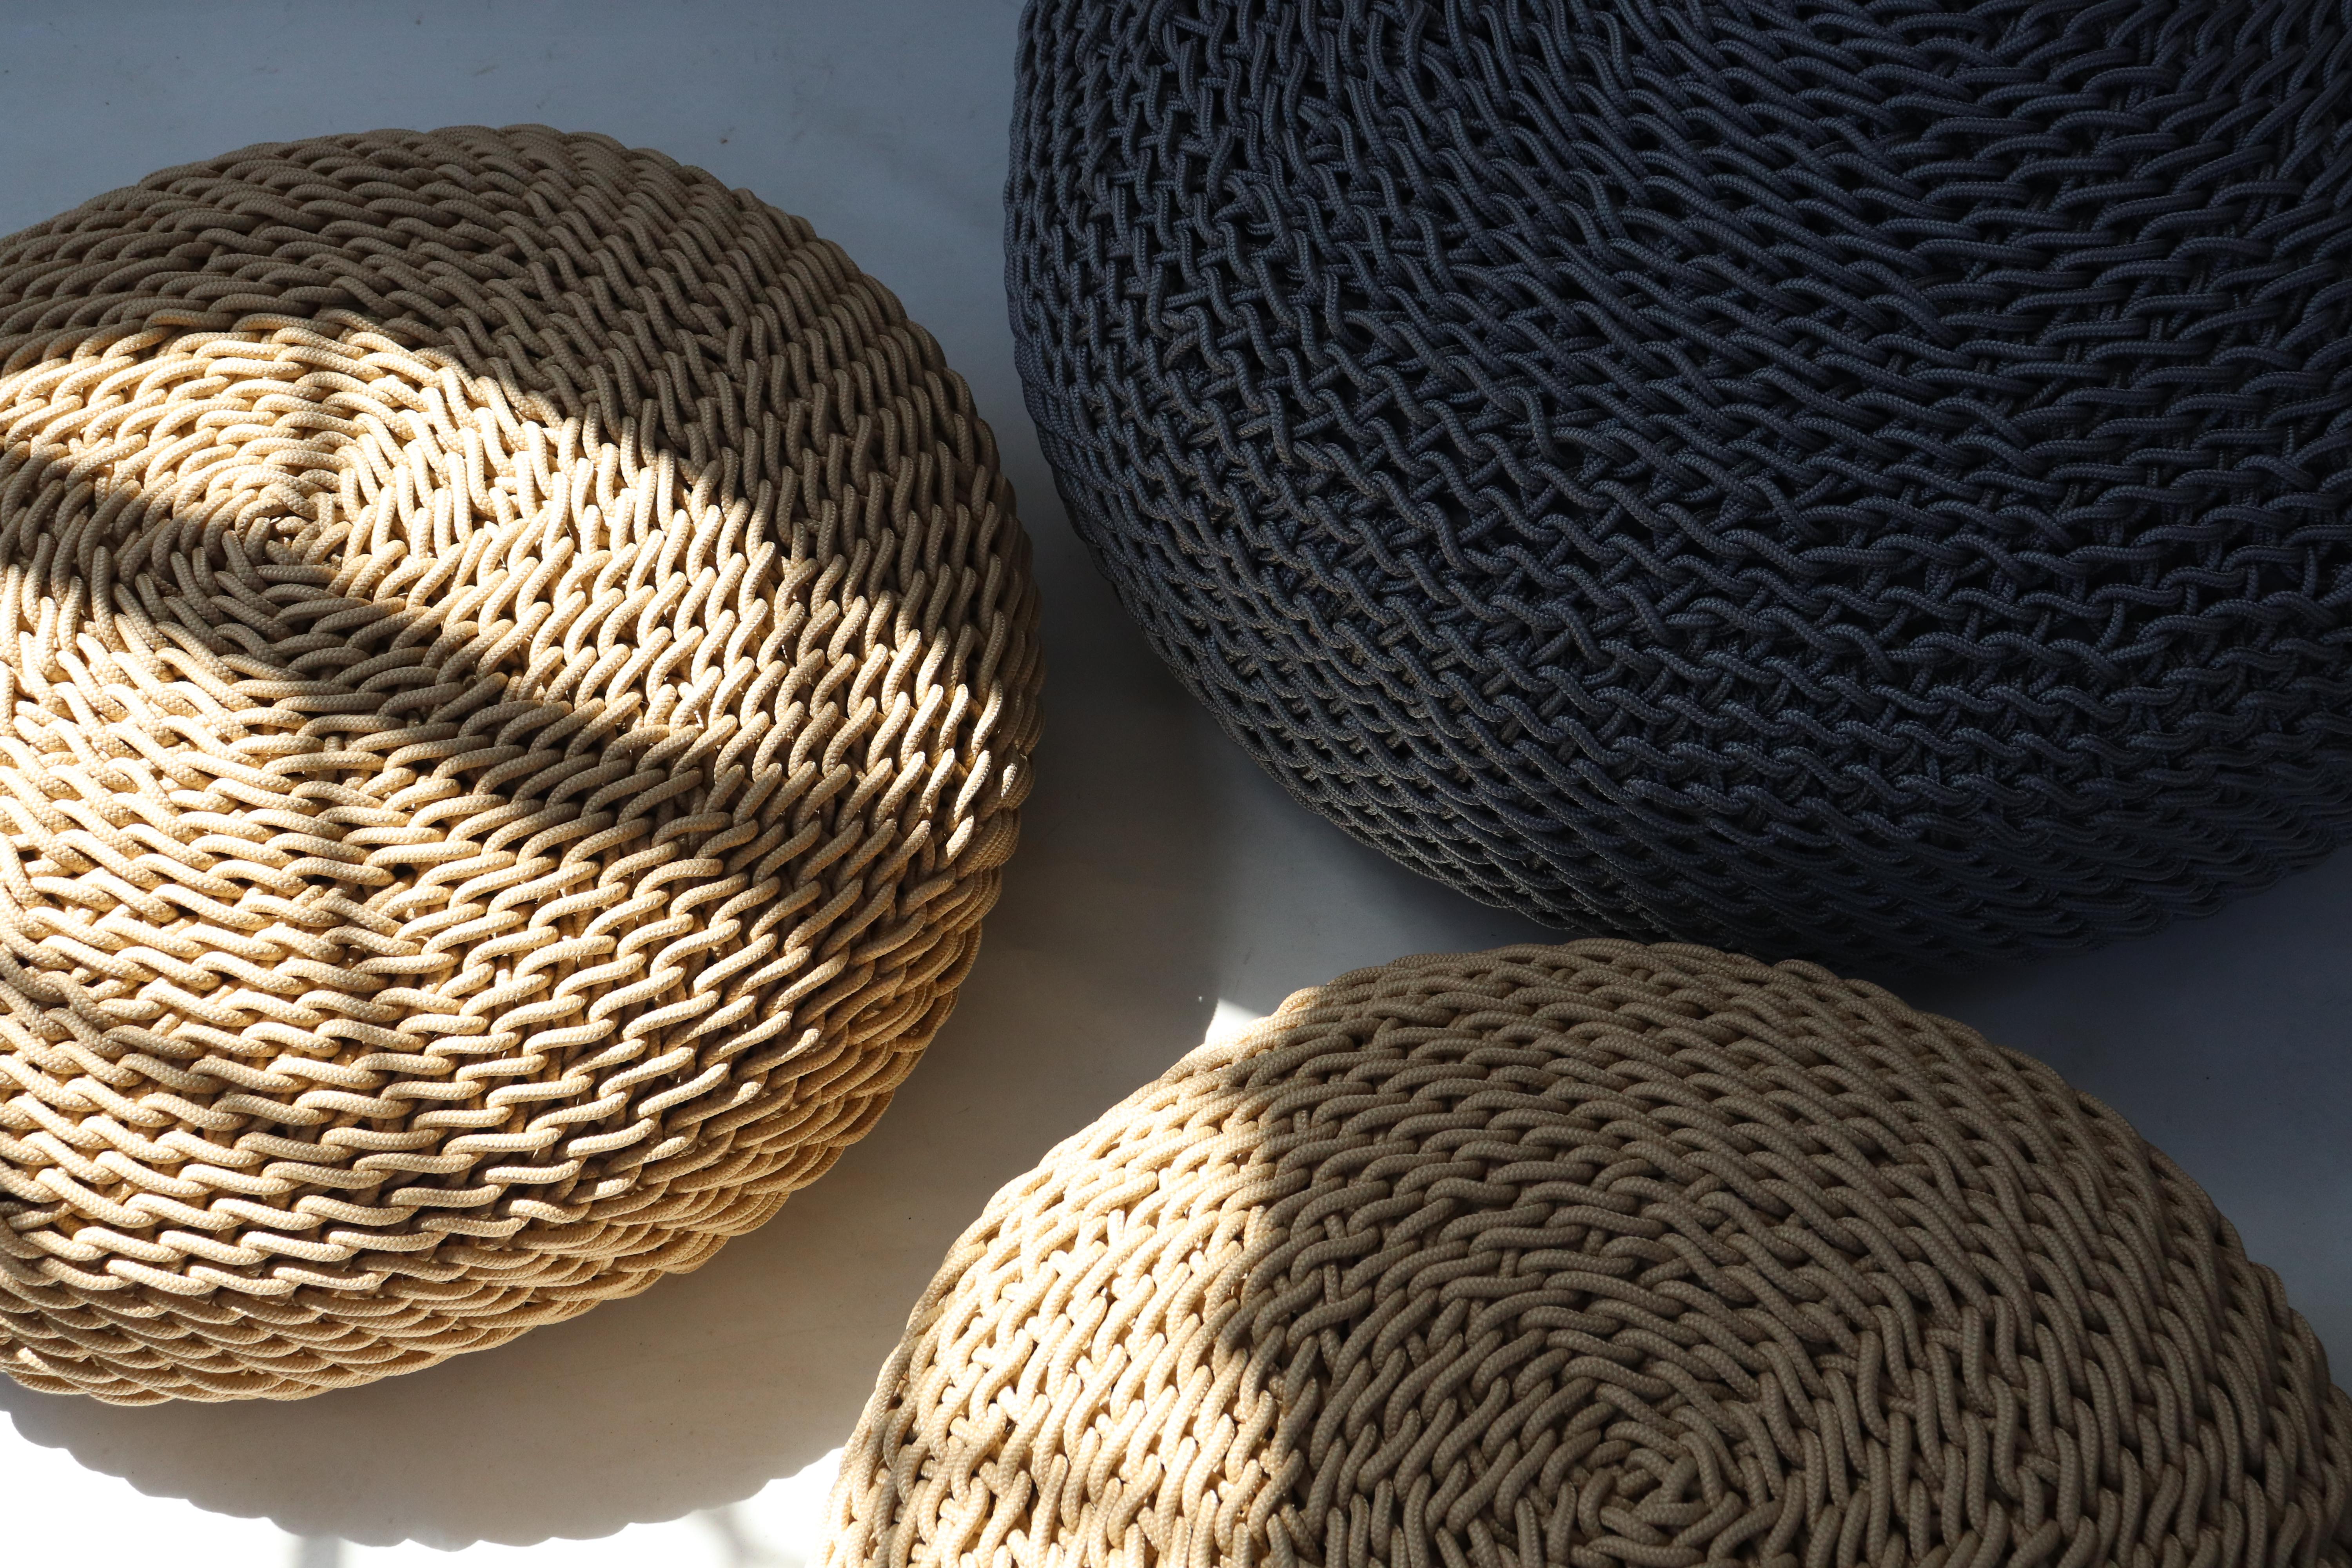 Complementing Studio Lloyd’s light sculptures, the authentic handcrafted ottomans are made out of their signature multifilament rope and offer a timeless aesthetic and feel, which at once brings texture and warmth to your living space. The ottoman